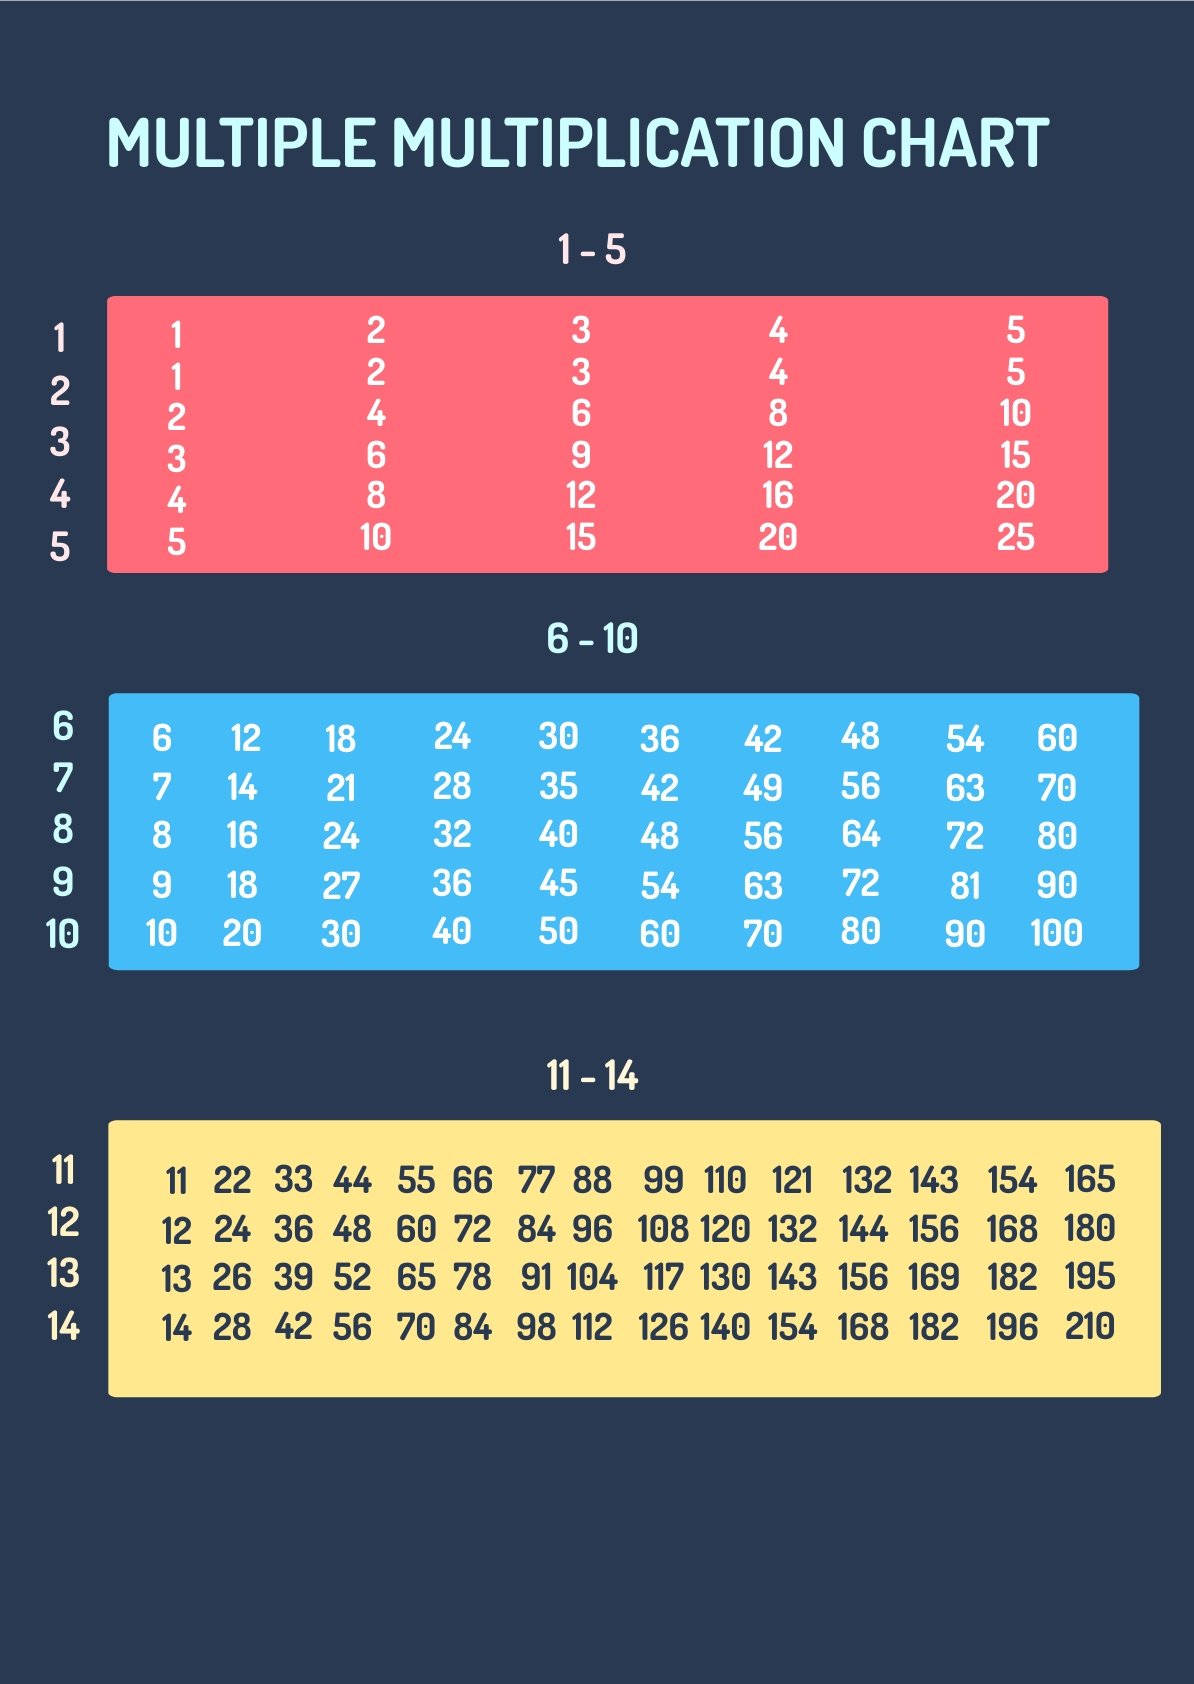 free-multiple-multiplication-chart-download-in-pdf-illustrator-template